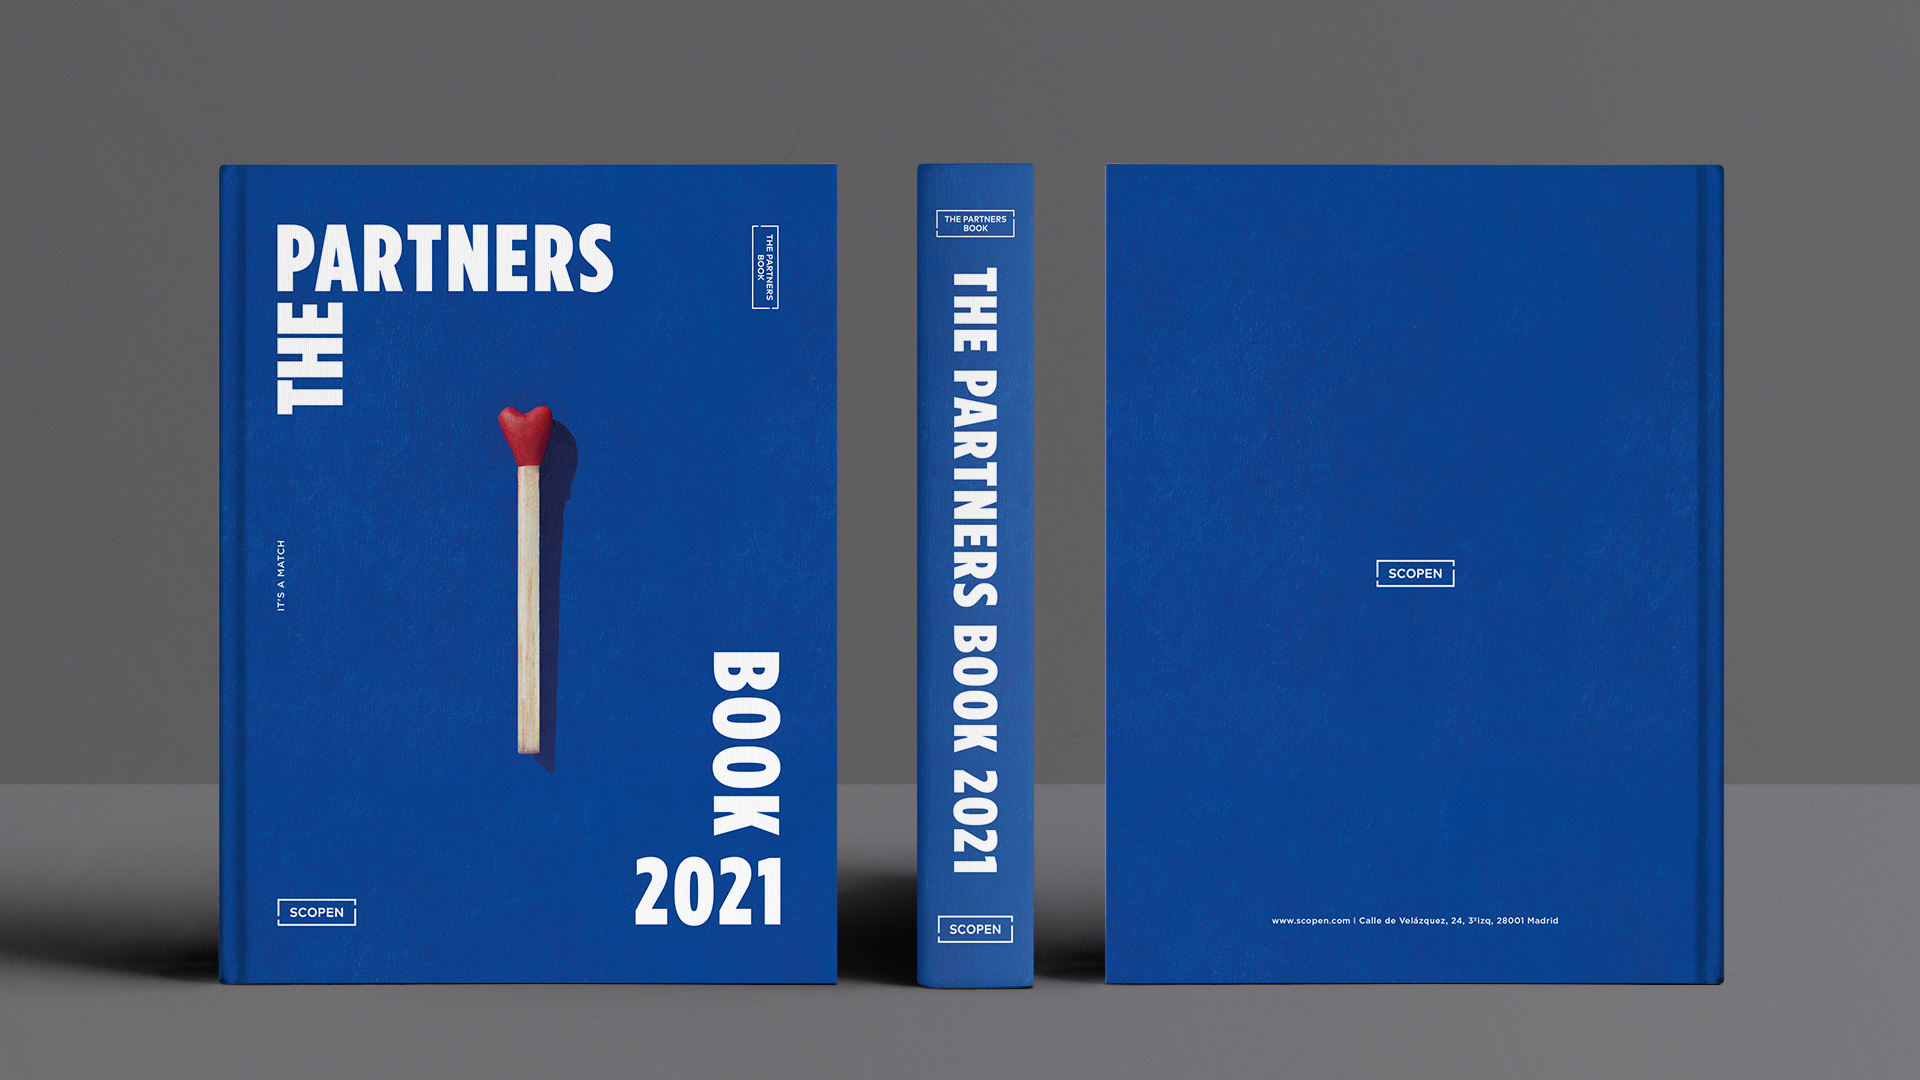 THE PARTNERS BOOK 2021 by SCOPEN